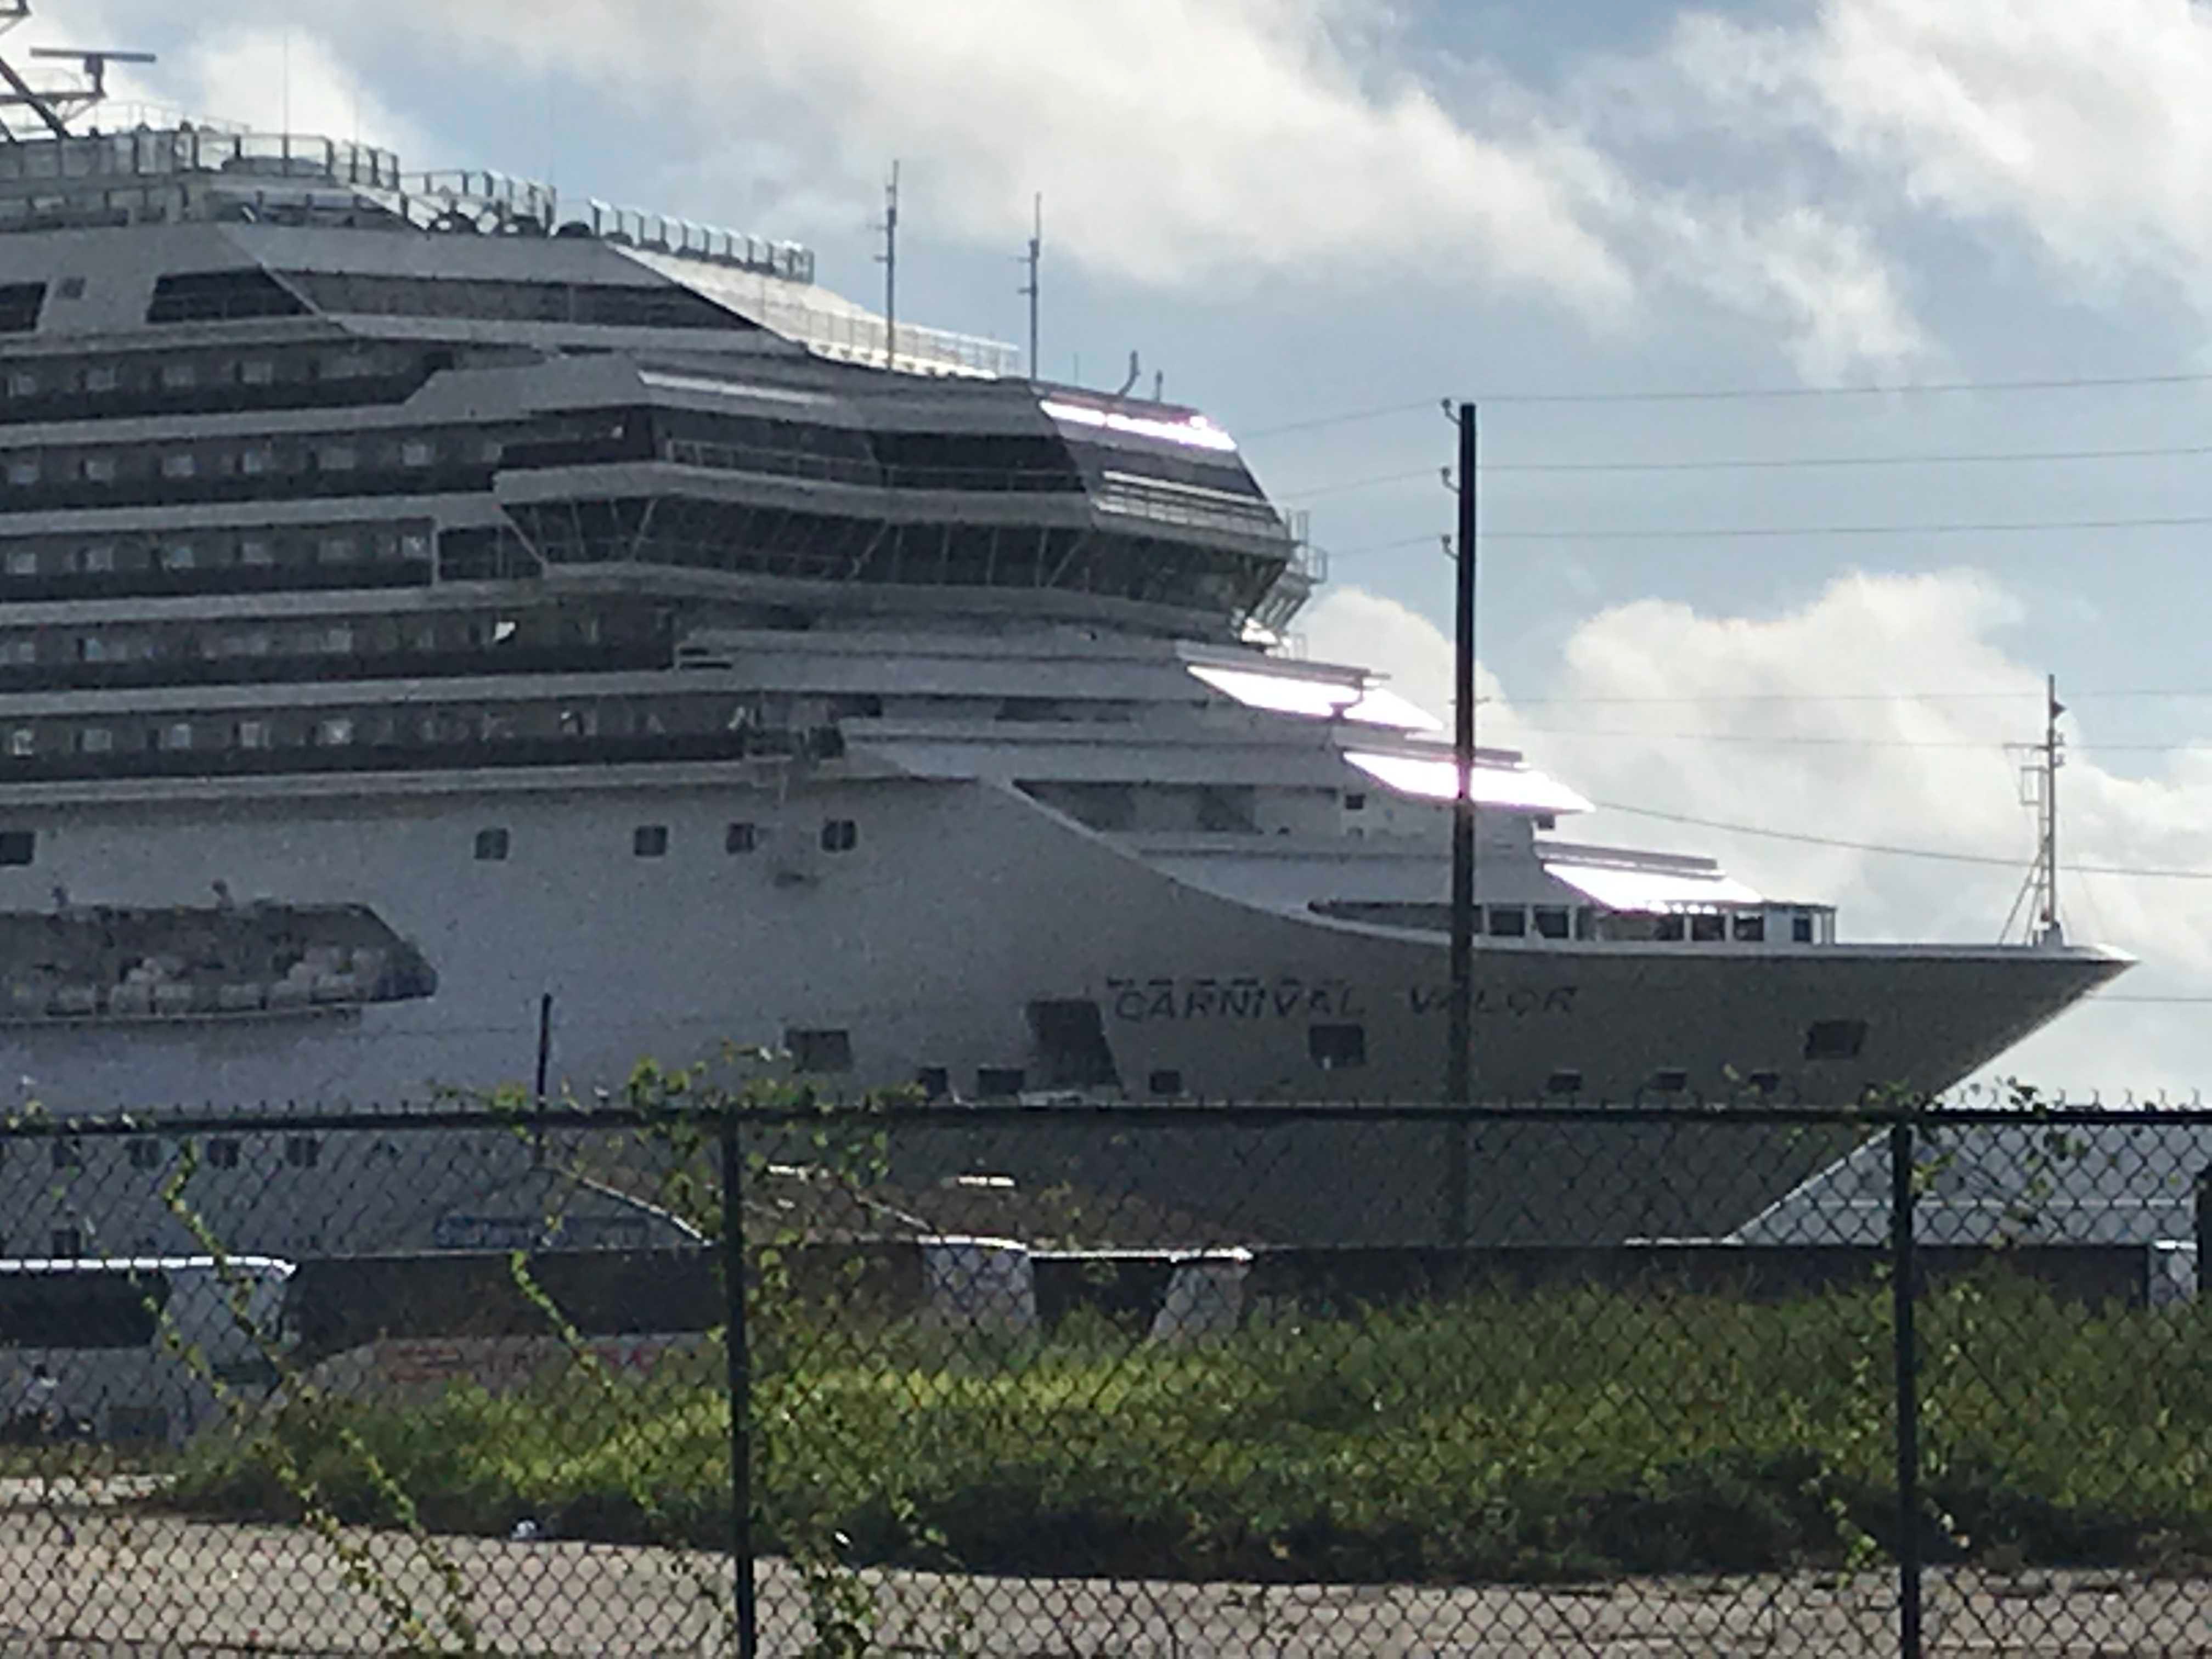 Man detained in Åland after burning underwear in cruise ship's drunk tank